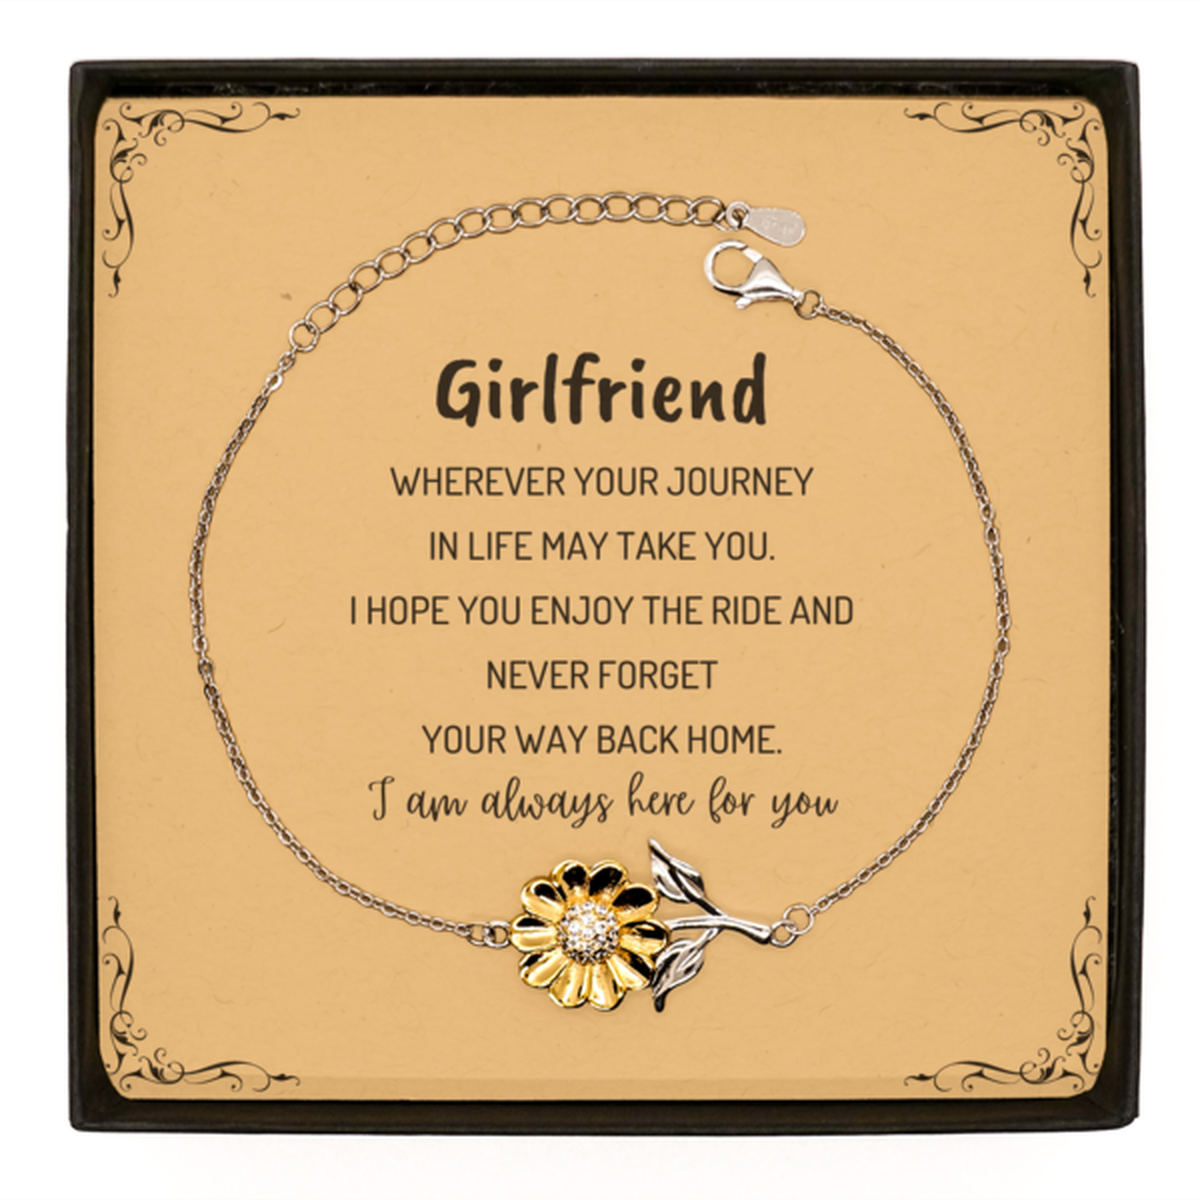 Girlfriend wherever your journey in life may take you, I am always here for you Girlfriend Sunflower Bracelet, Awesome Christmas Gifts For Girlfriend Message Card, Girlfriend Birthday Gifts for Men Women Family Loved One